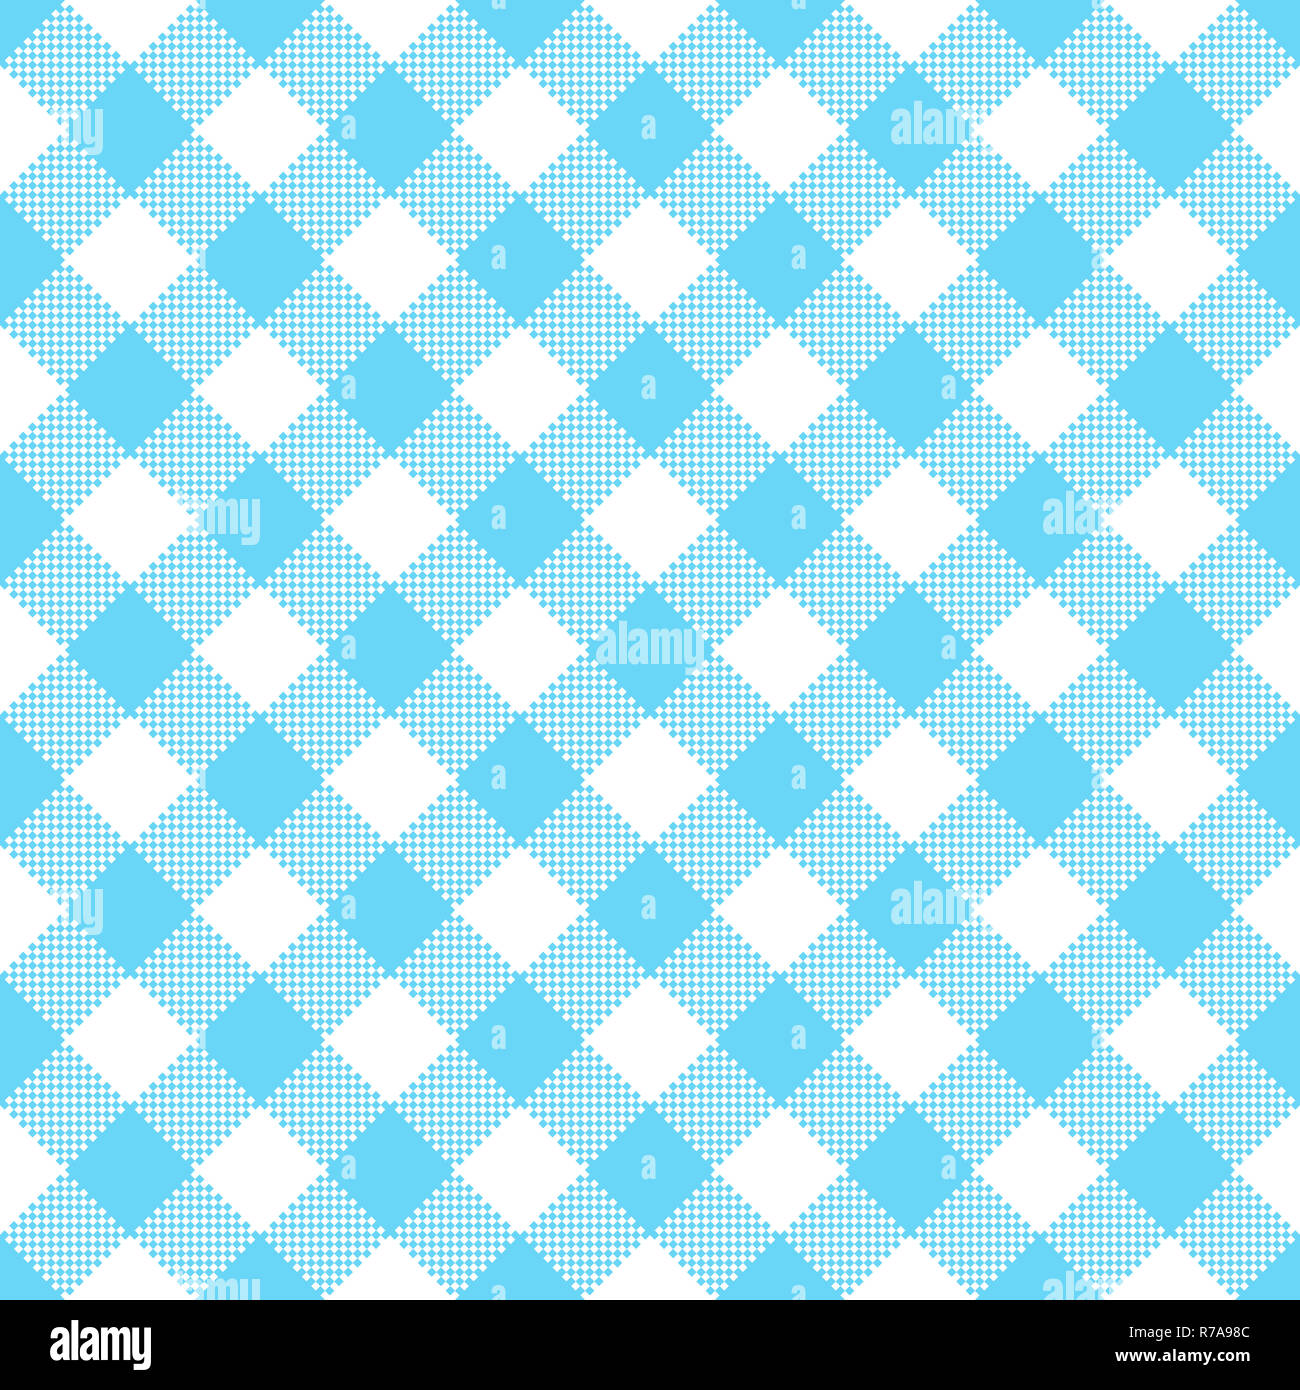 Blue and white tablecloth pattern Stock Photo